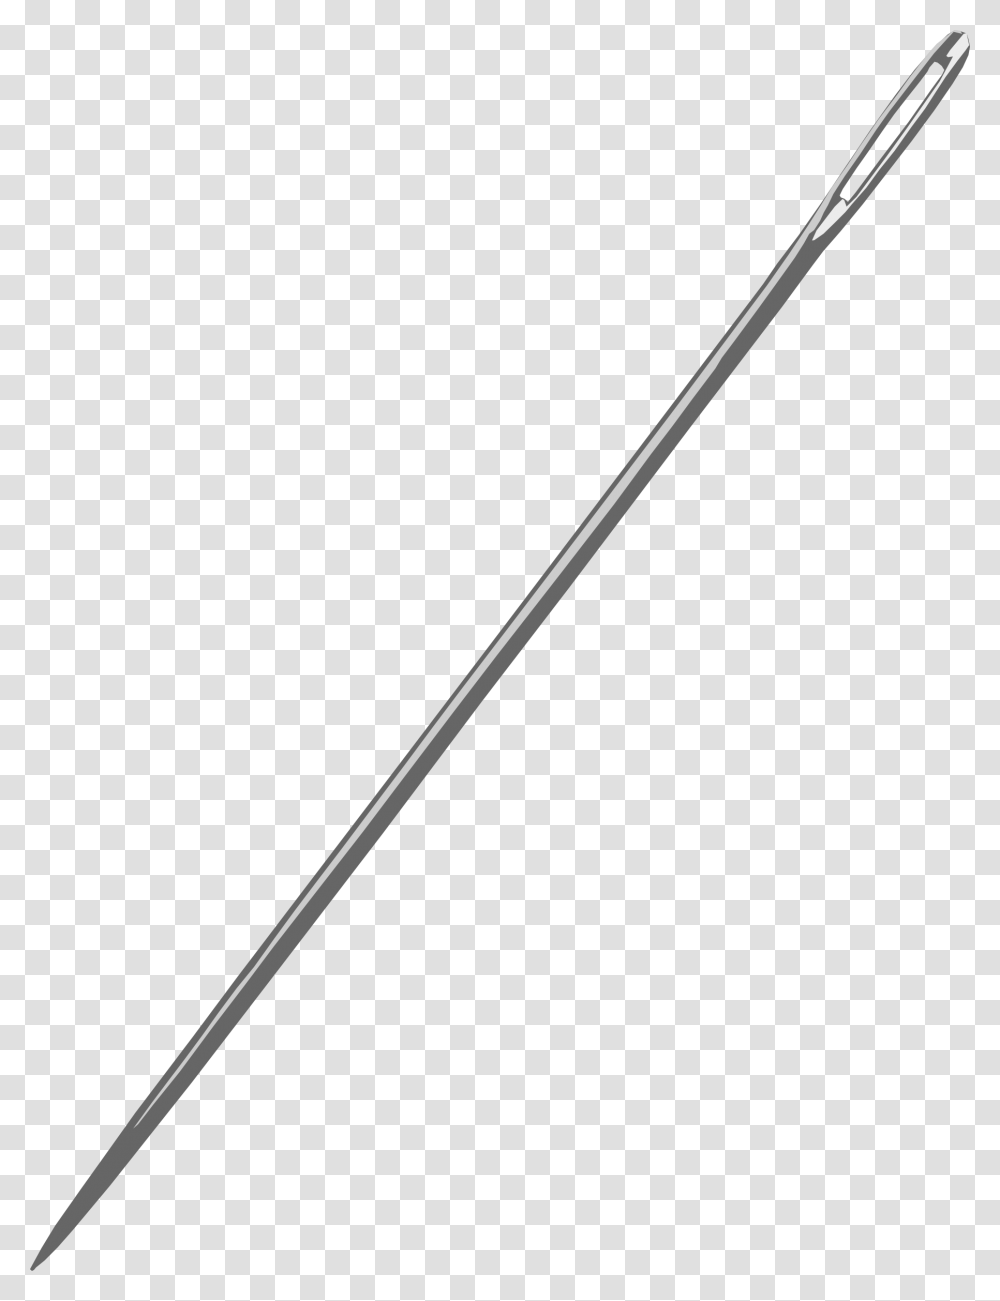 Sewing Needle By Gingercoons HadTkf Clipart, Tool, Weapon, Weaponry, Stick Transparent Png